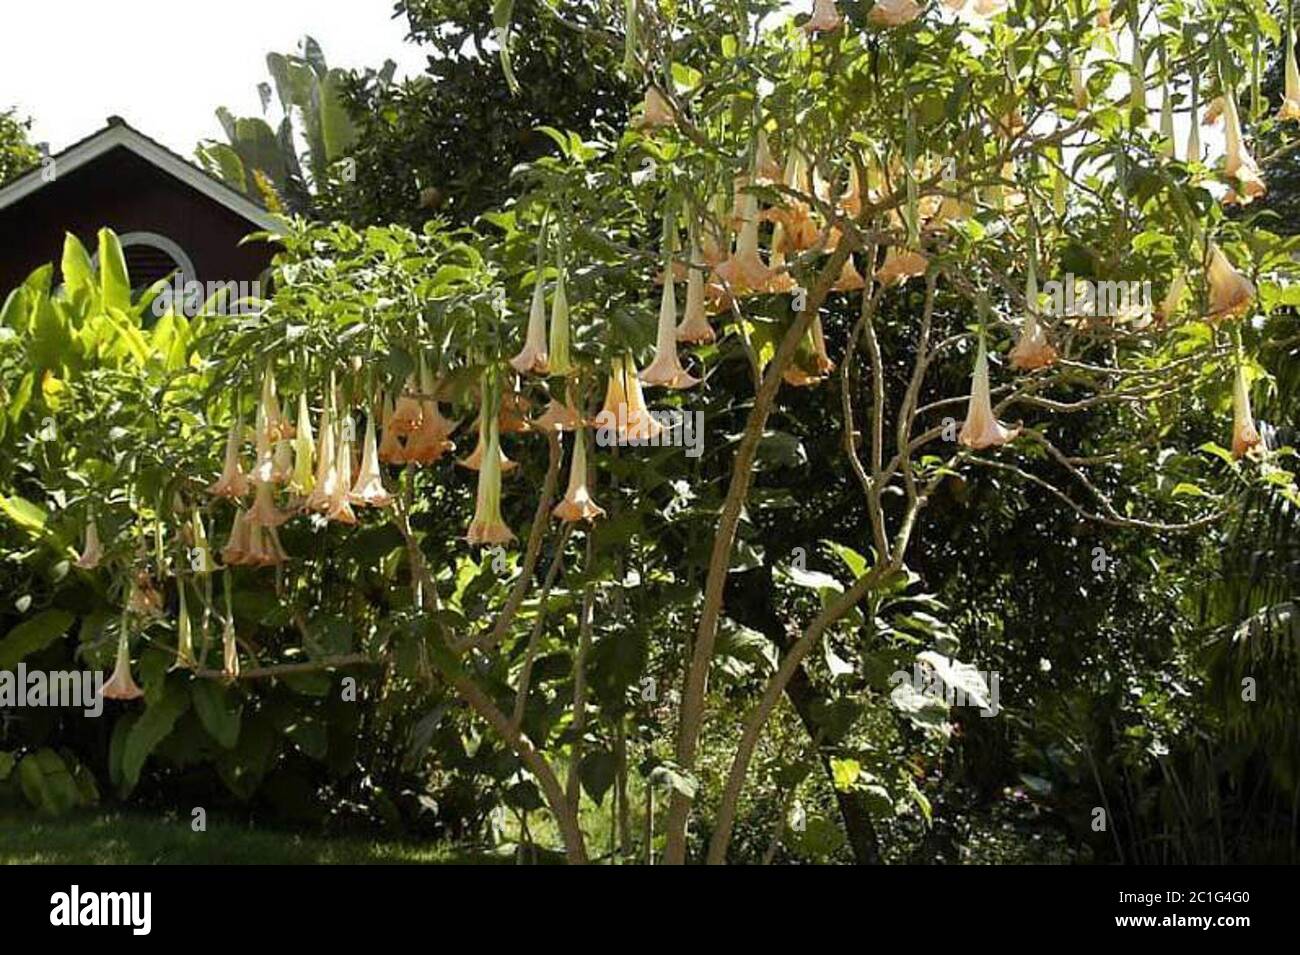 Wagner D0768.jpg Brugmansia candida Pers. Stock Photo